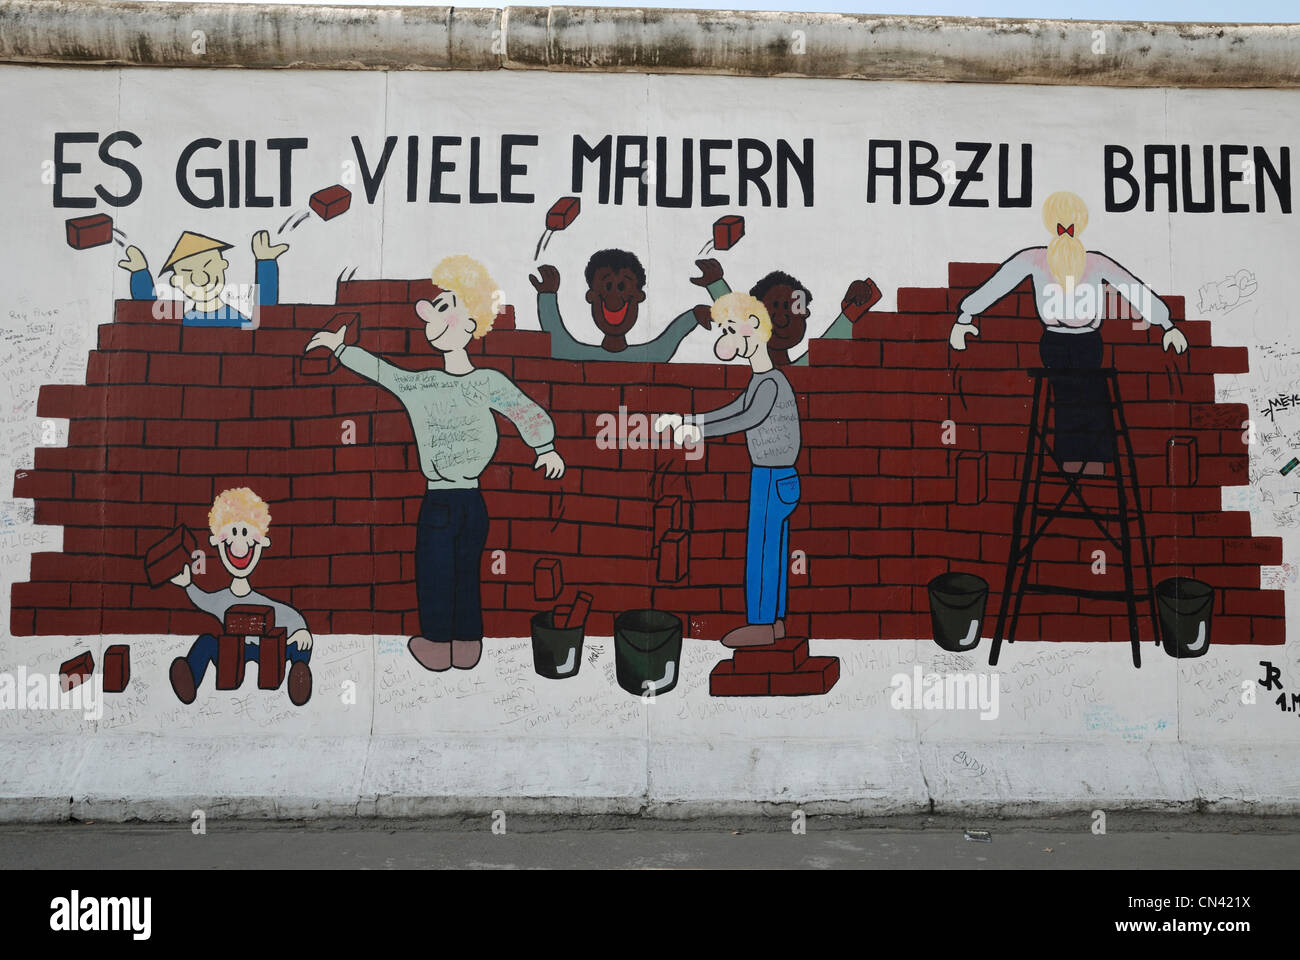 "Es gilt viele Mauern abzubauen" by Ines Bayer and Raik Hönemann on the Berlin Wall at the East Side Gallery, Berlin, Germany. Stock Photo